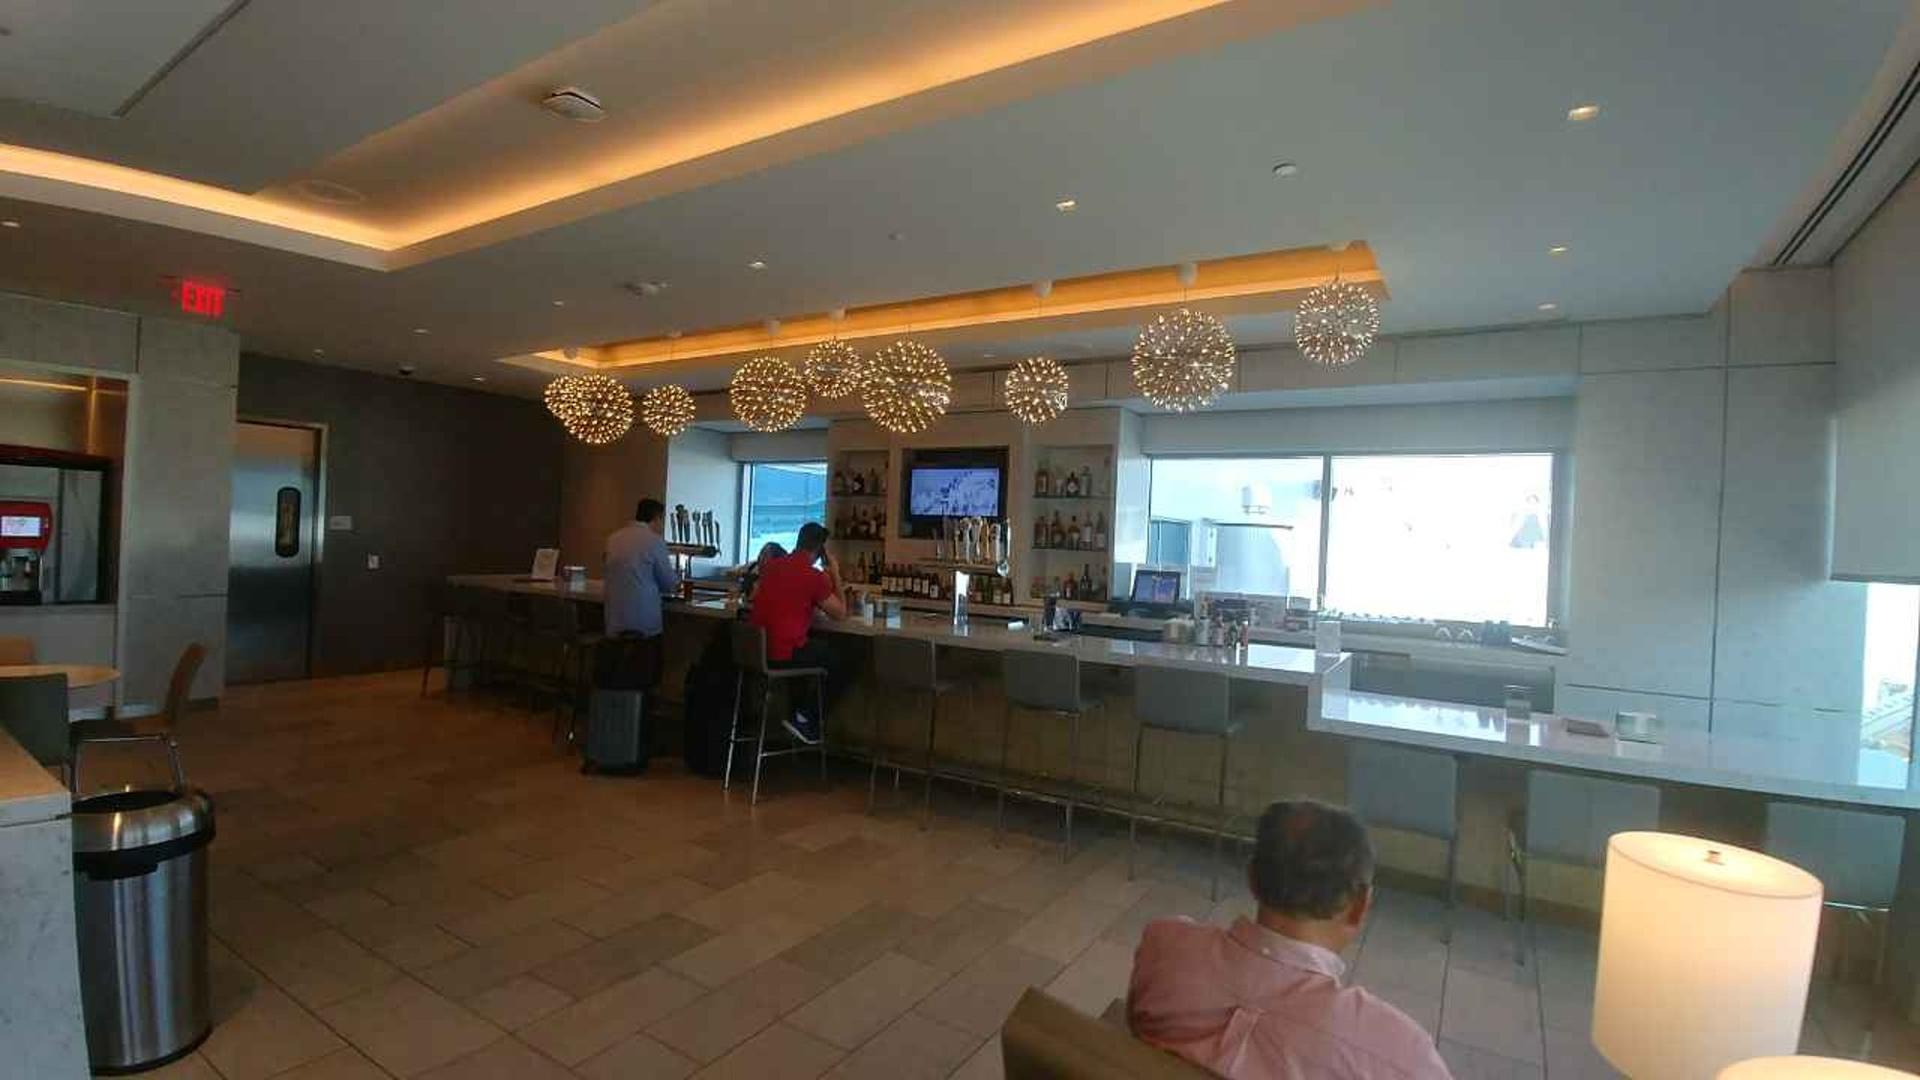 United Airlines United Club image 3 of 7